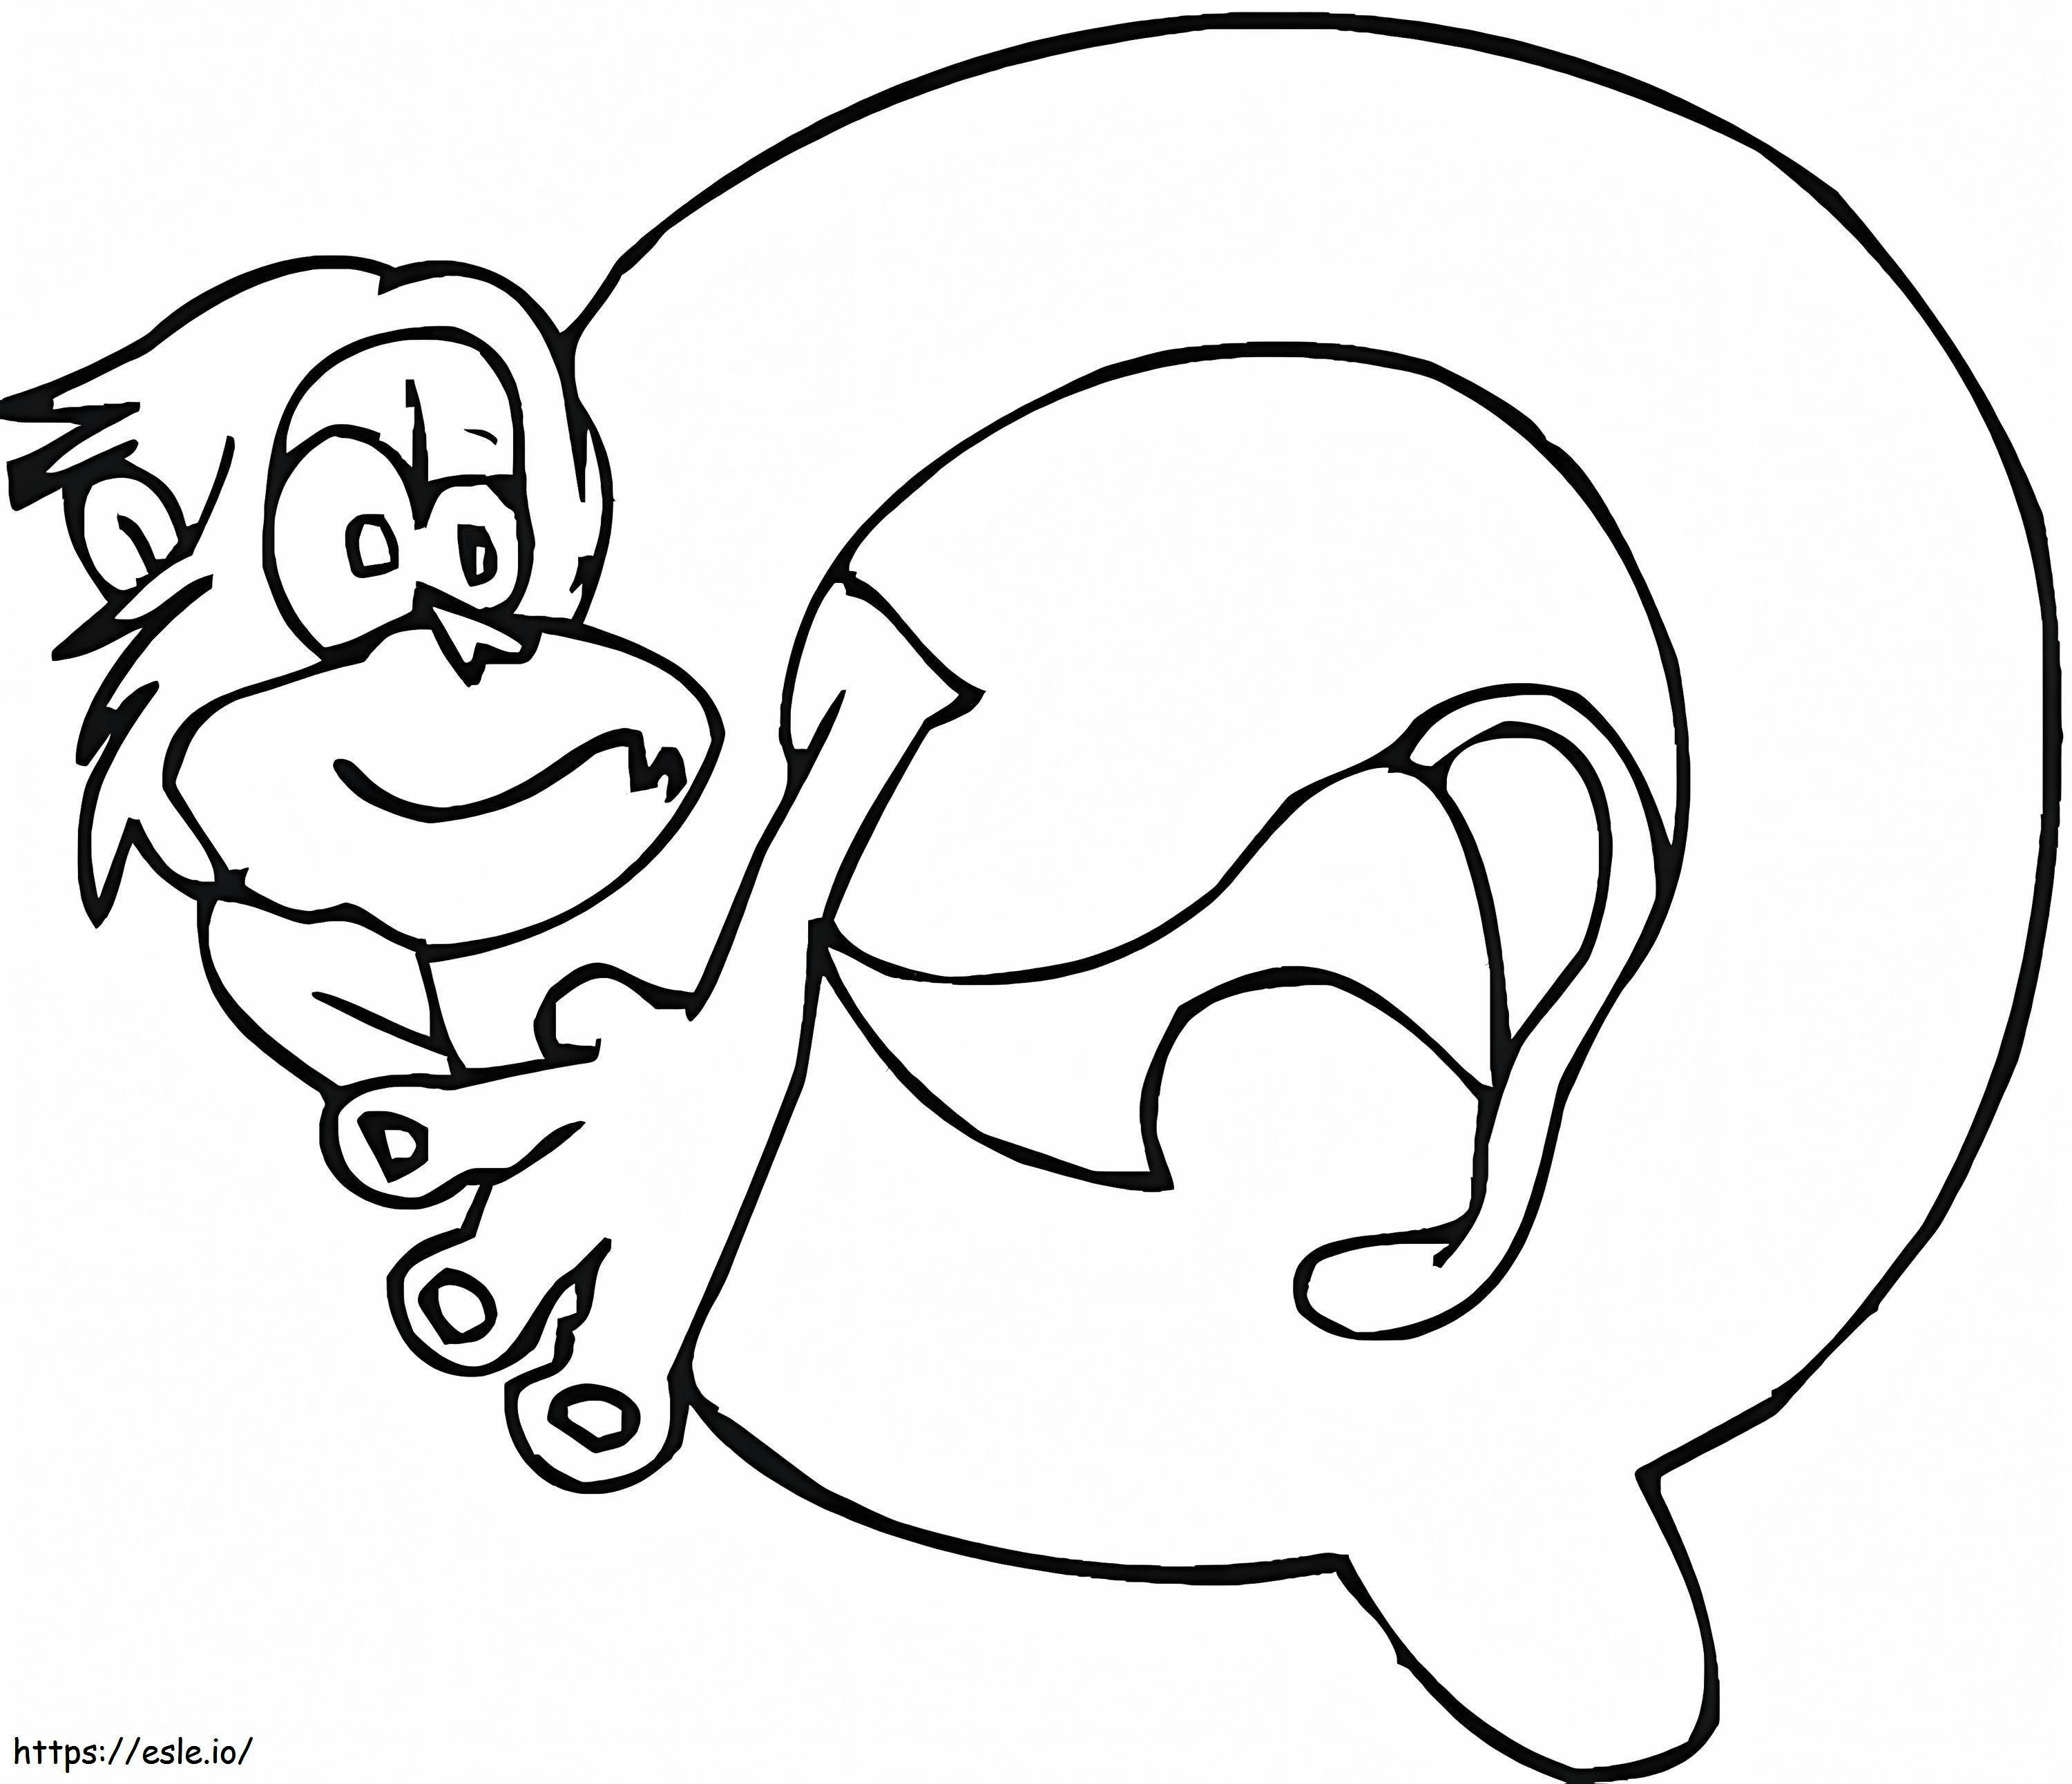 Letter Q 7 coloring page